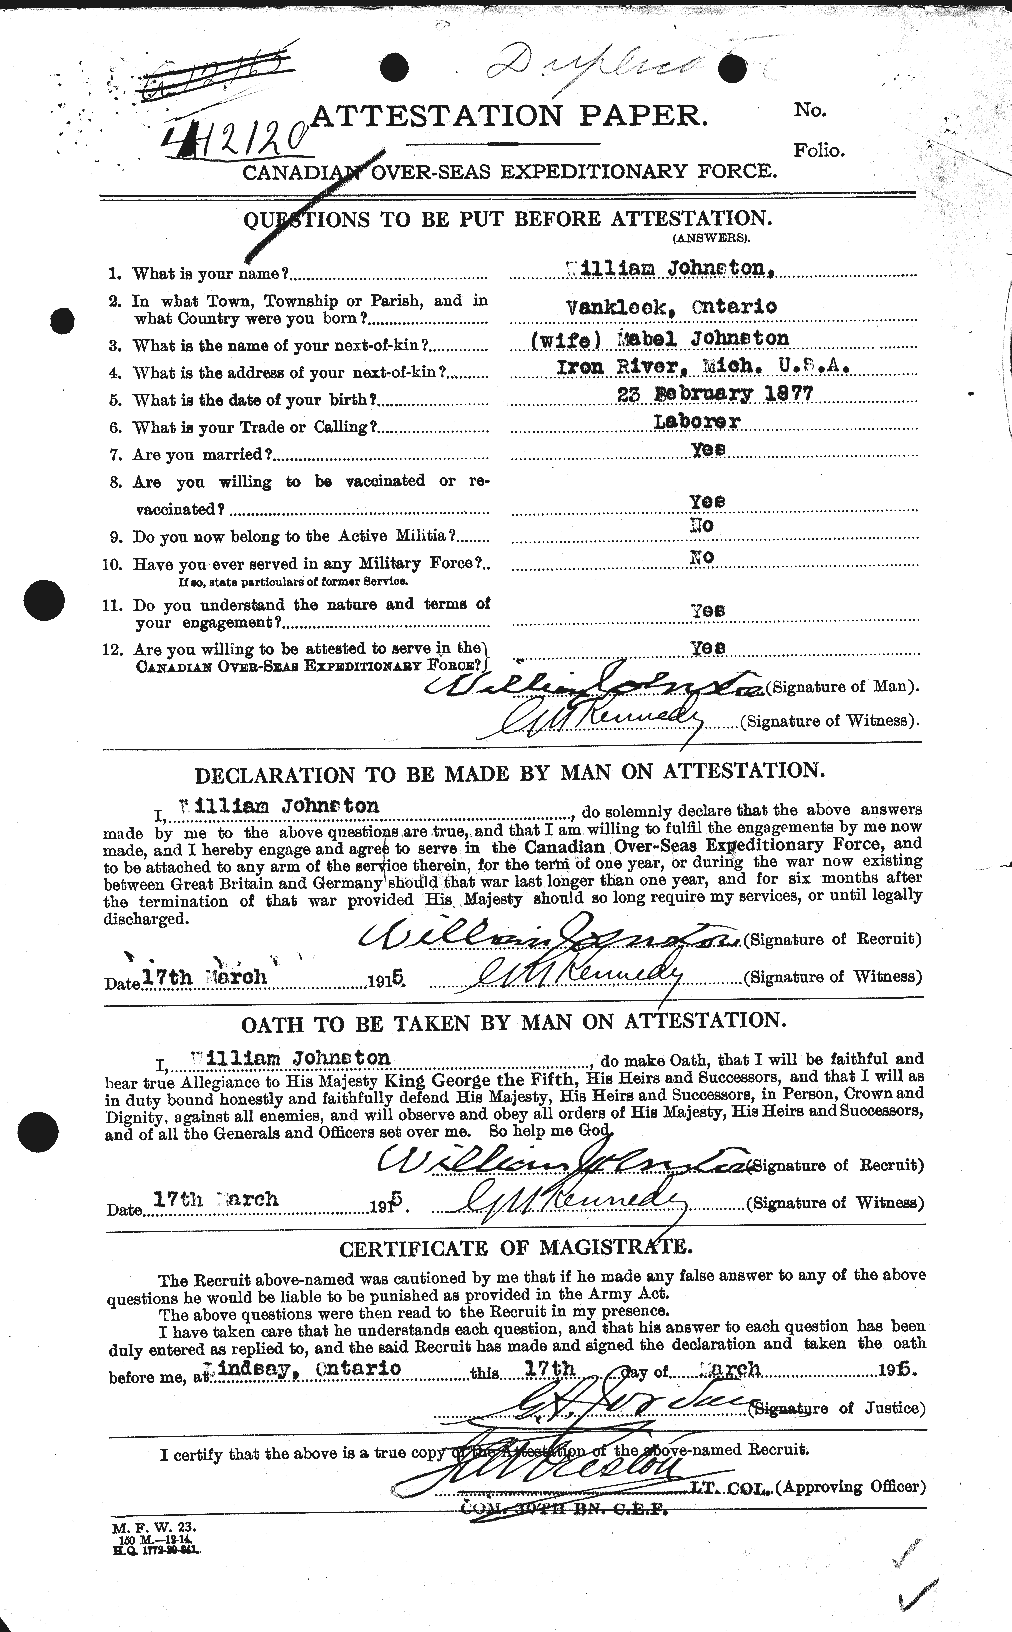 Personnel Records of the First World War - CEF 427248a